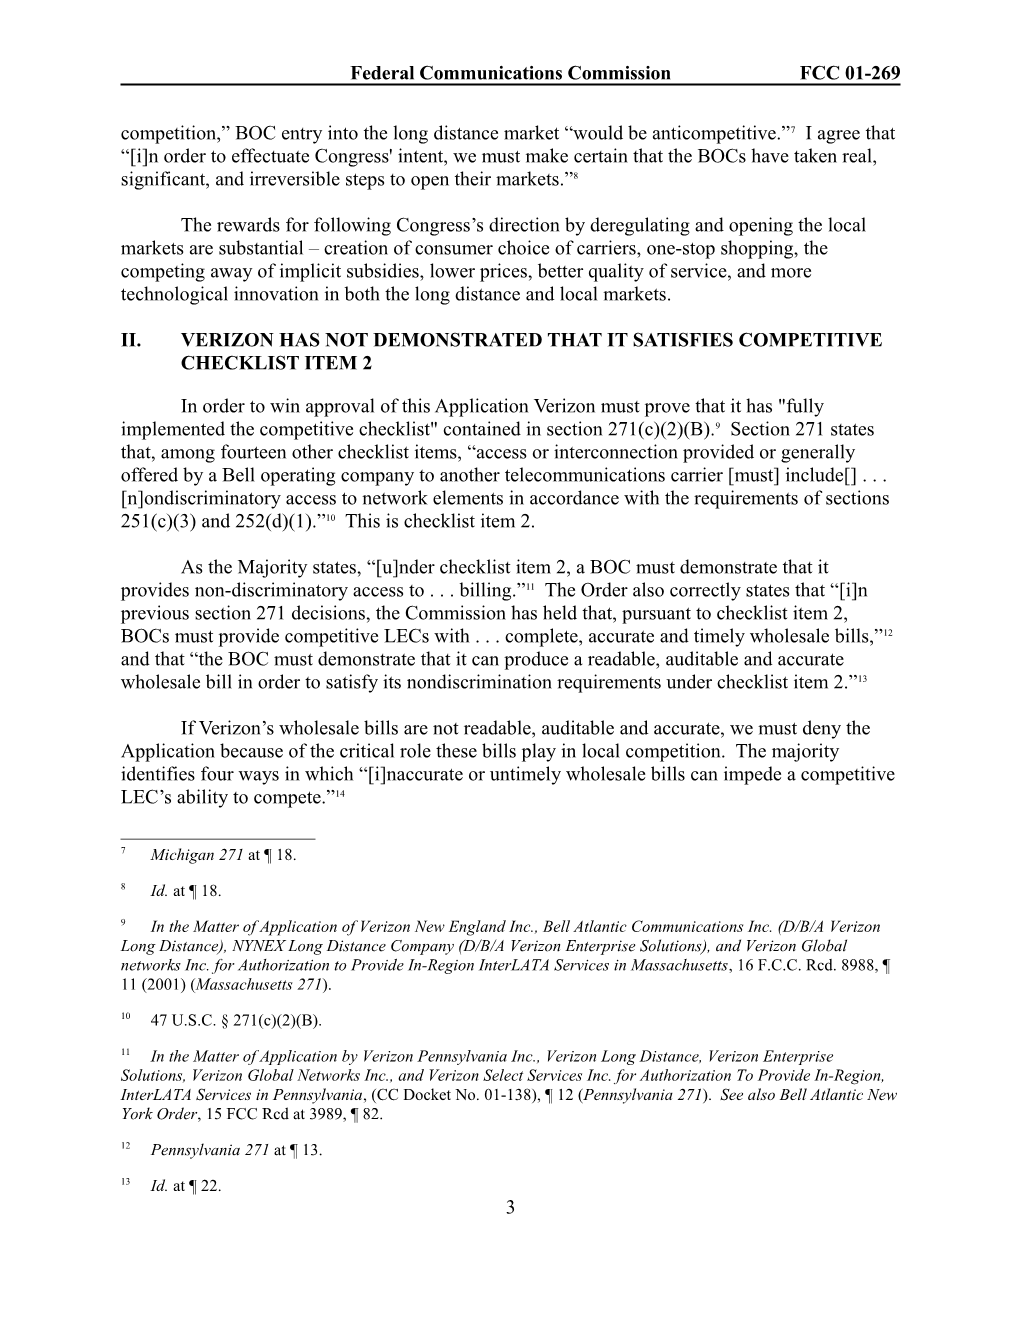 Dissenting Opinion of Commissioner Michael J. Copps